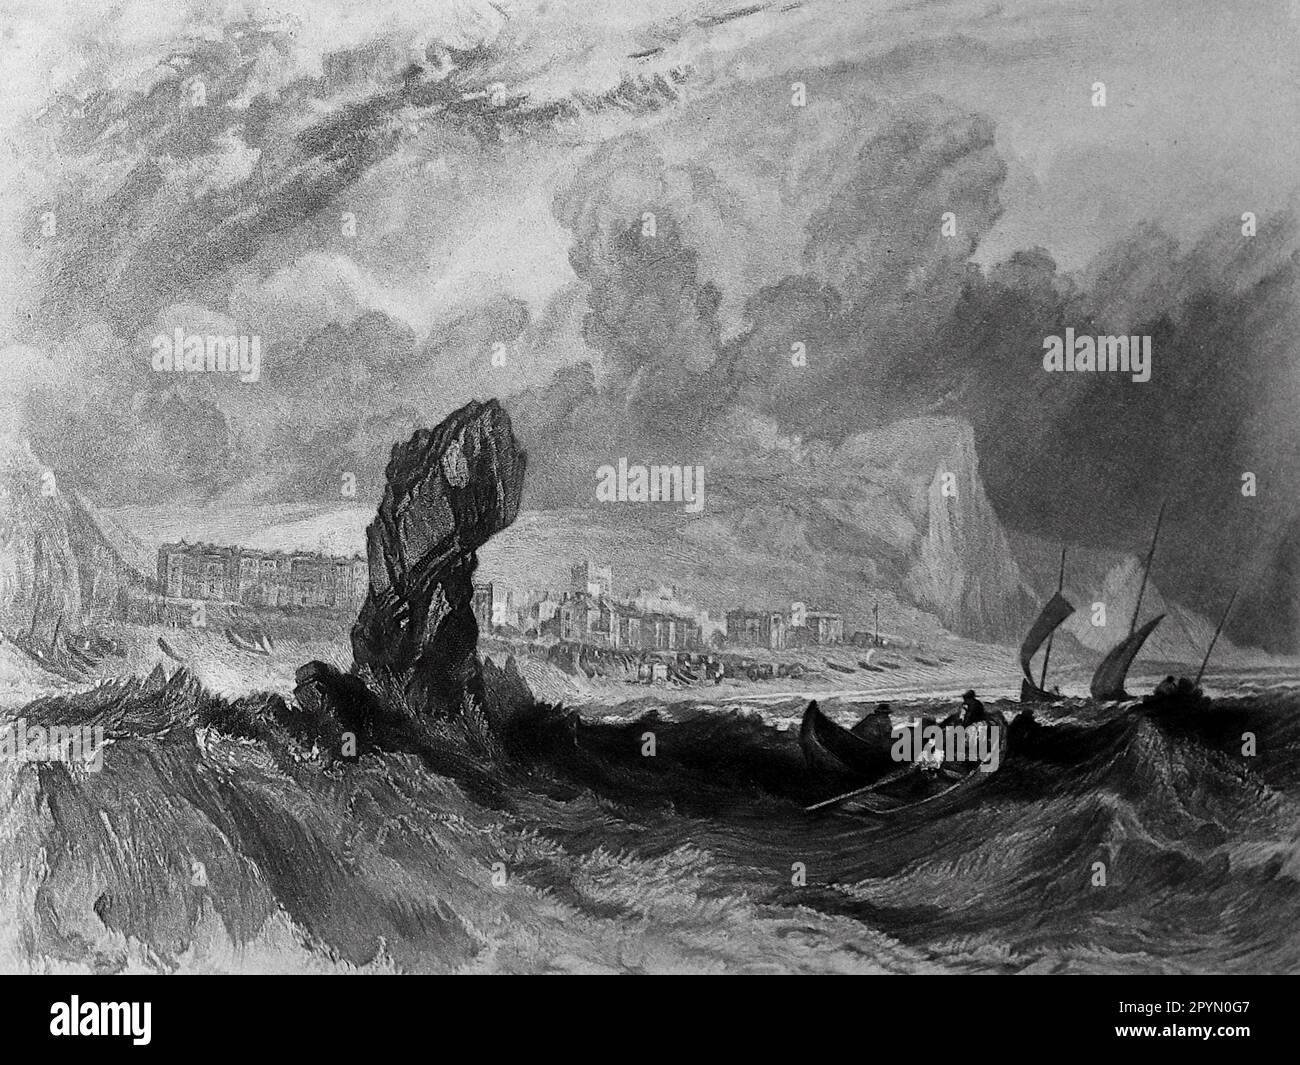 An engraving by J.M.W. Turner: Sidmouth: Engraving of boats on rough sea with the harbour and beach in the background. c1856. Stock Photo